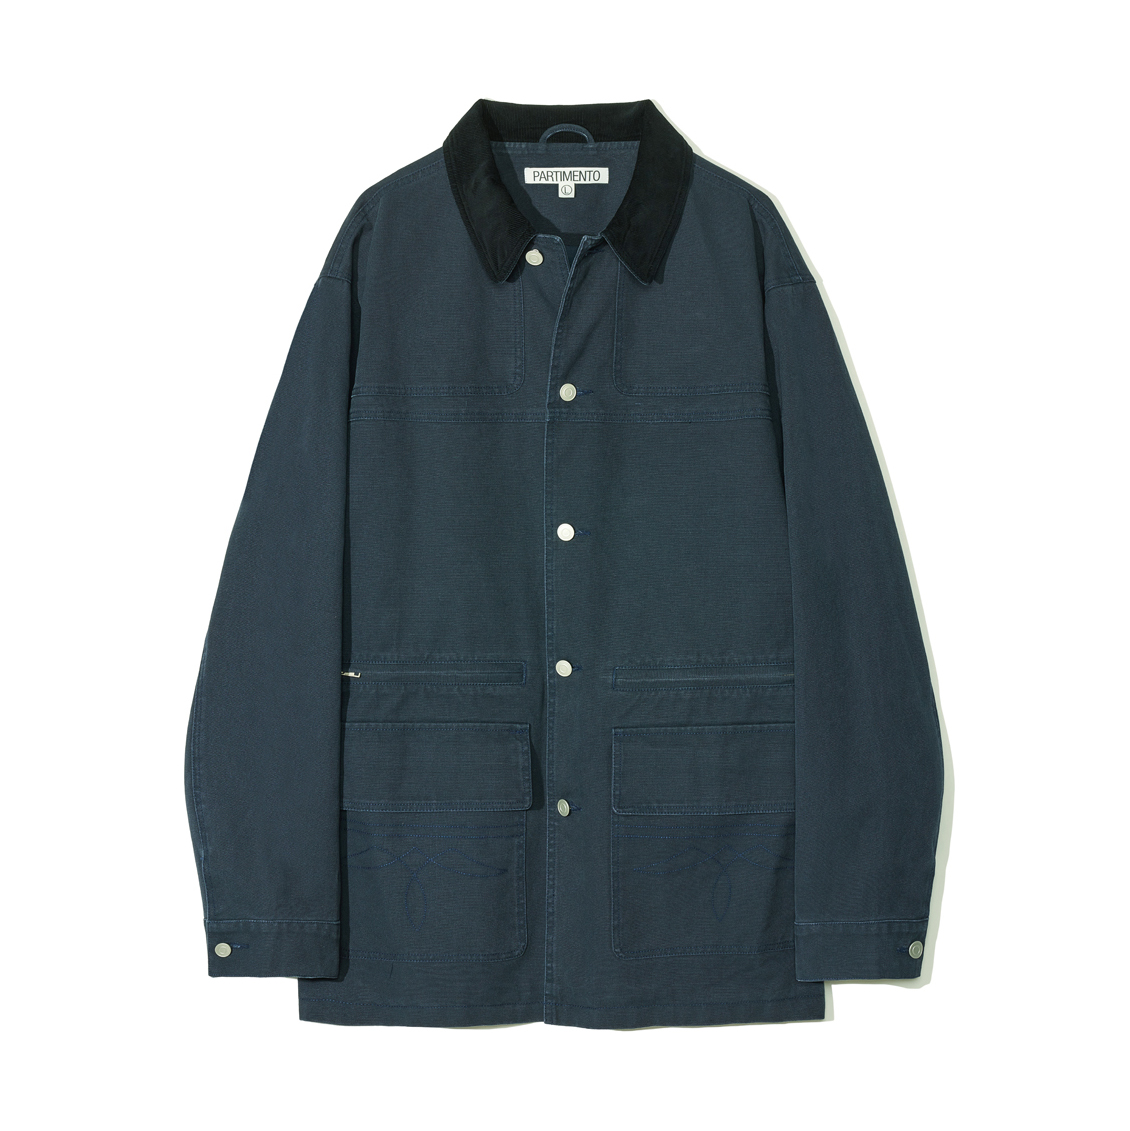 partimento-western-chore-jacket-in-navy